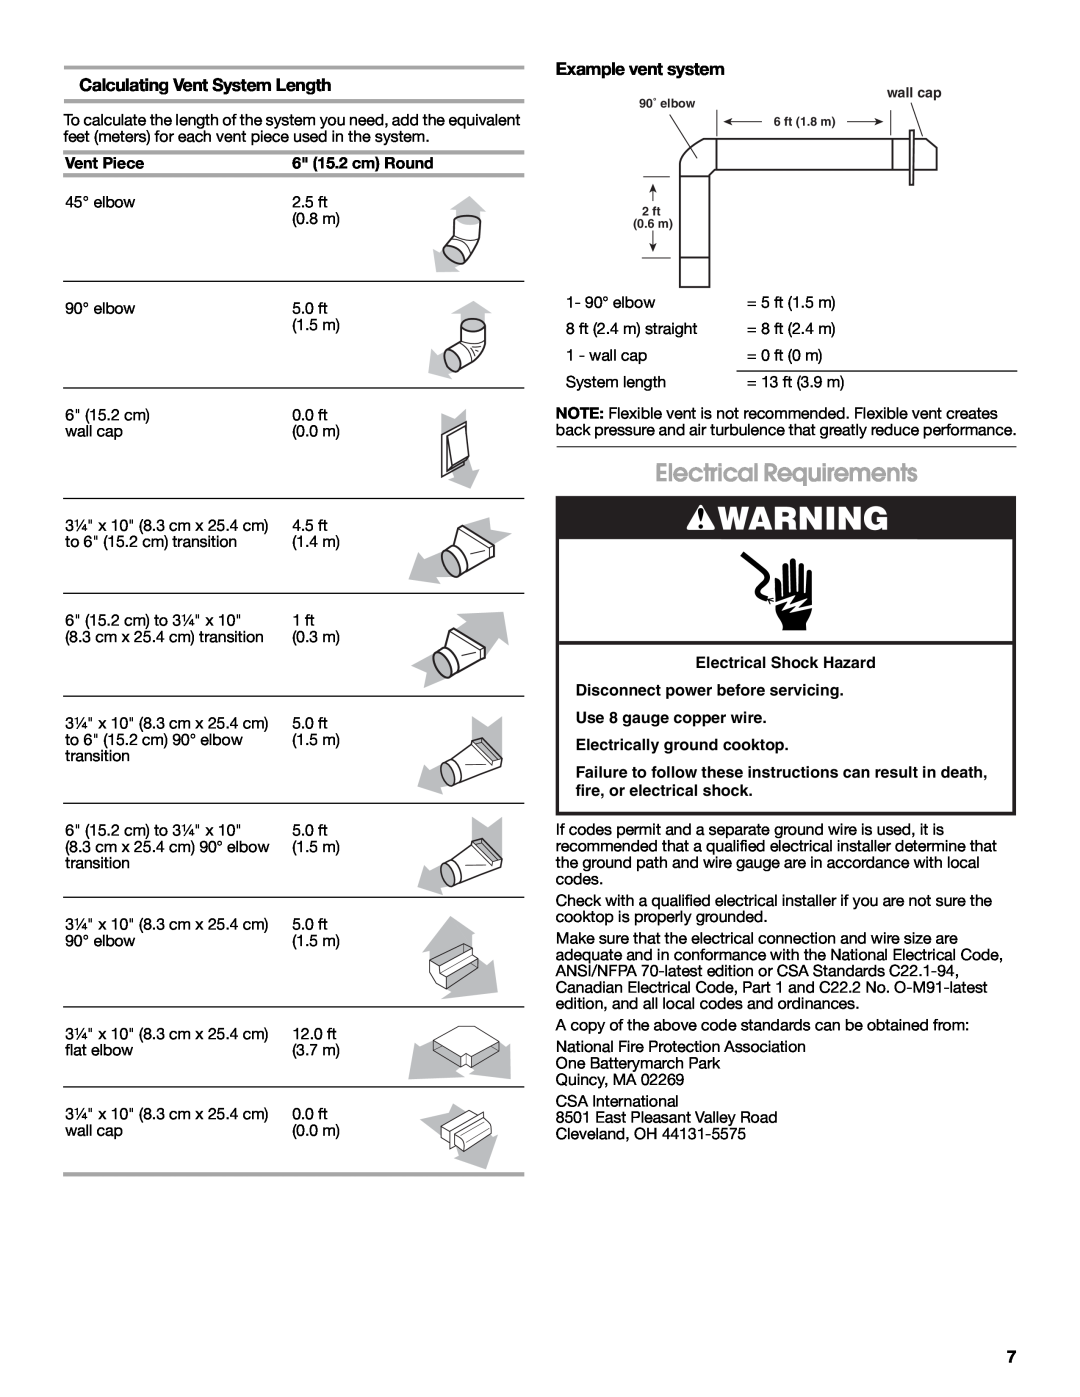 Jenn-Air W10197059B installation instructions Electrical Requirements, Calculating Vent System Length, Example vent system 